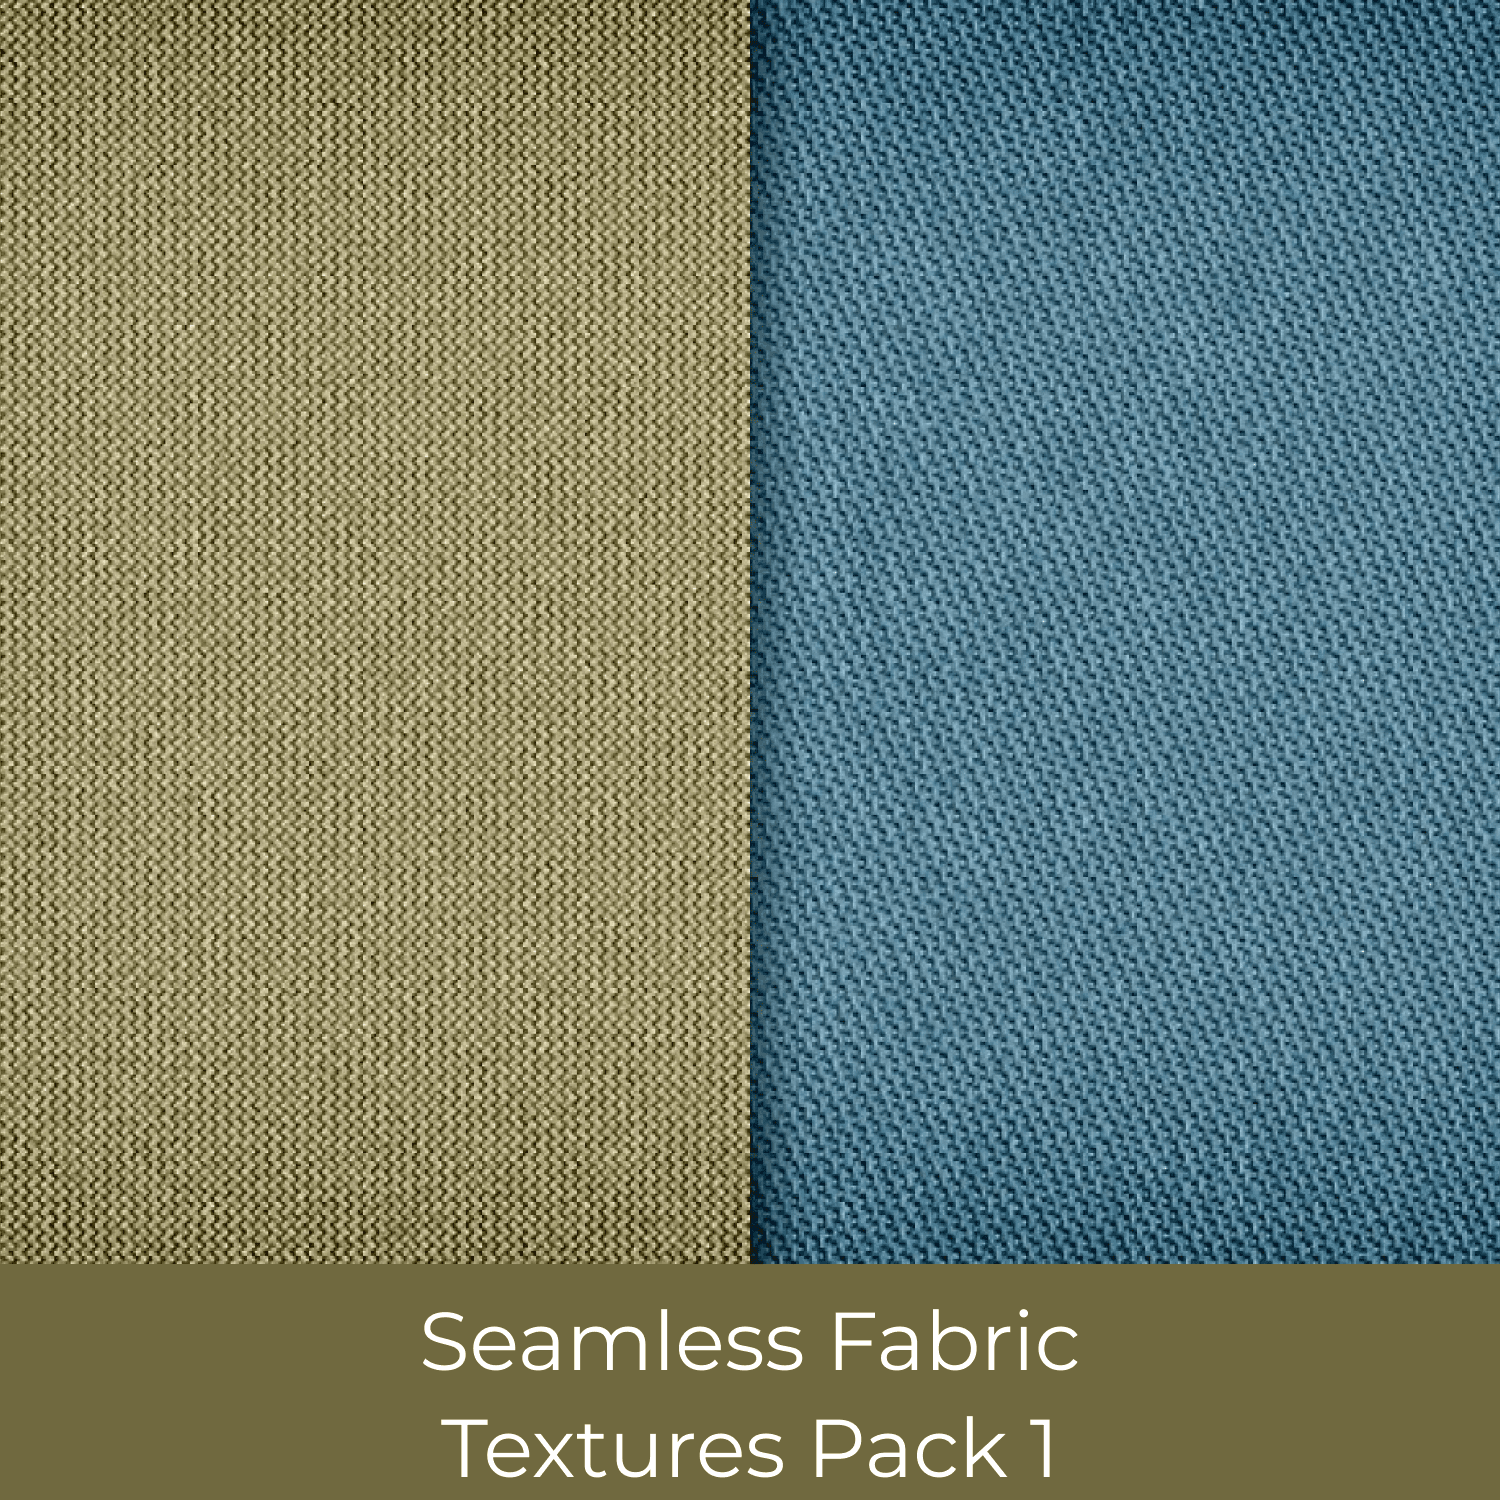 Seamless Fabric Textures Pack 1 cover.